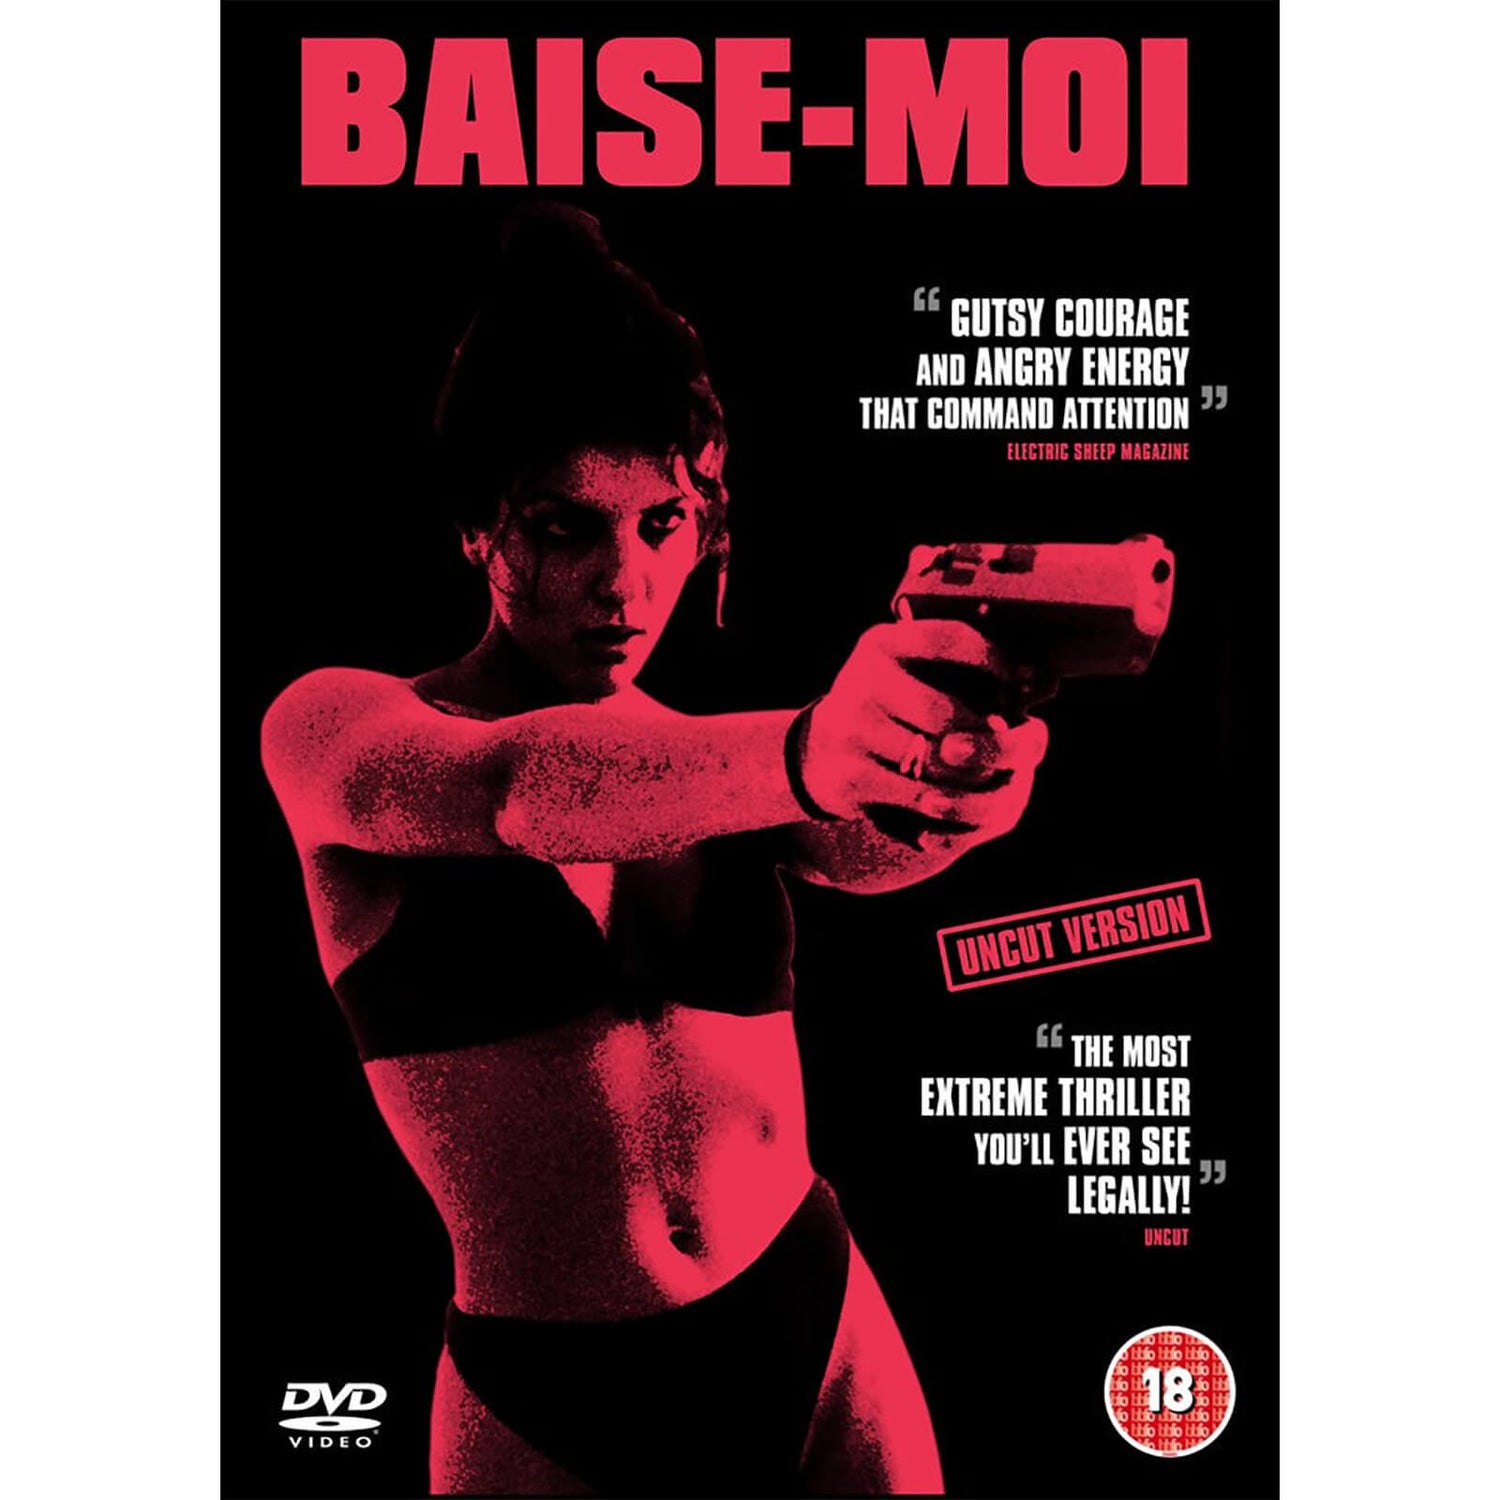 cece mathis recommends Baise Moi Full Movie